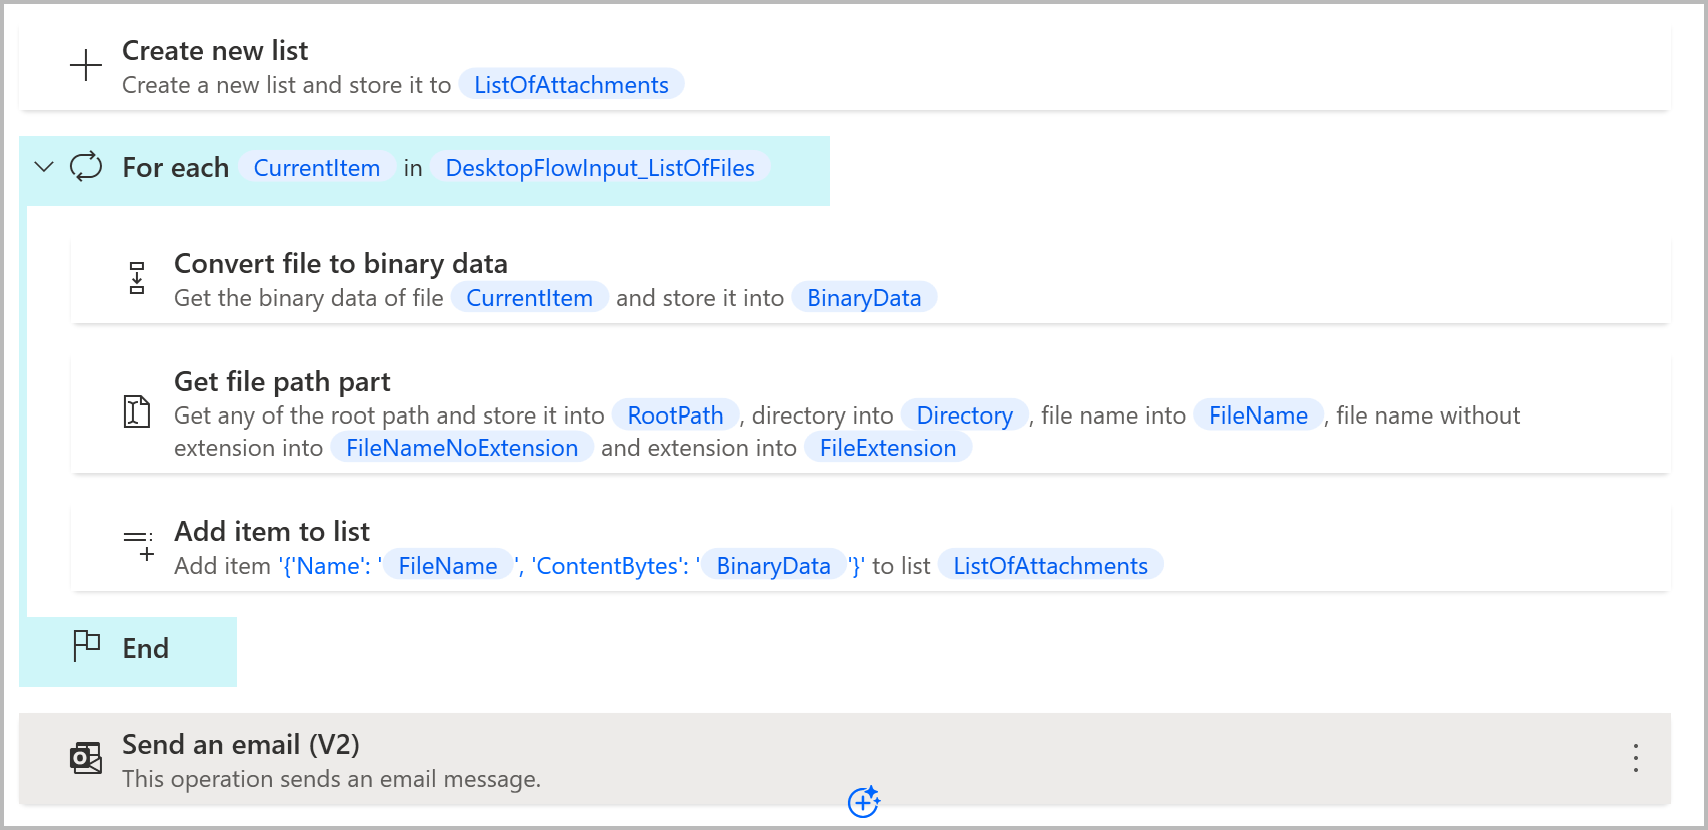 Screenshot of the example overview on how to use a list of attachments in the Send an email (V2) action.